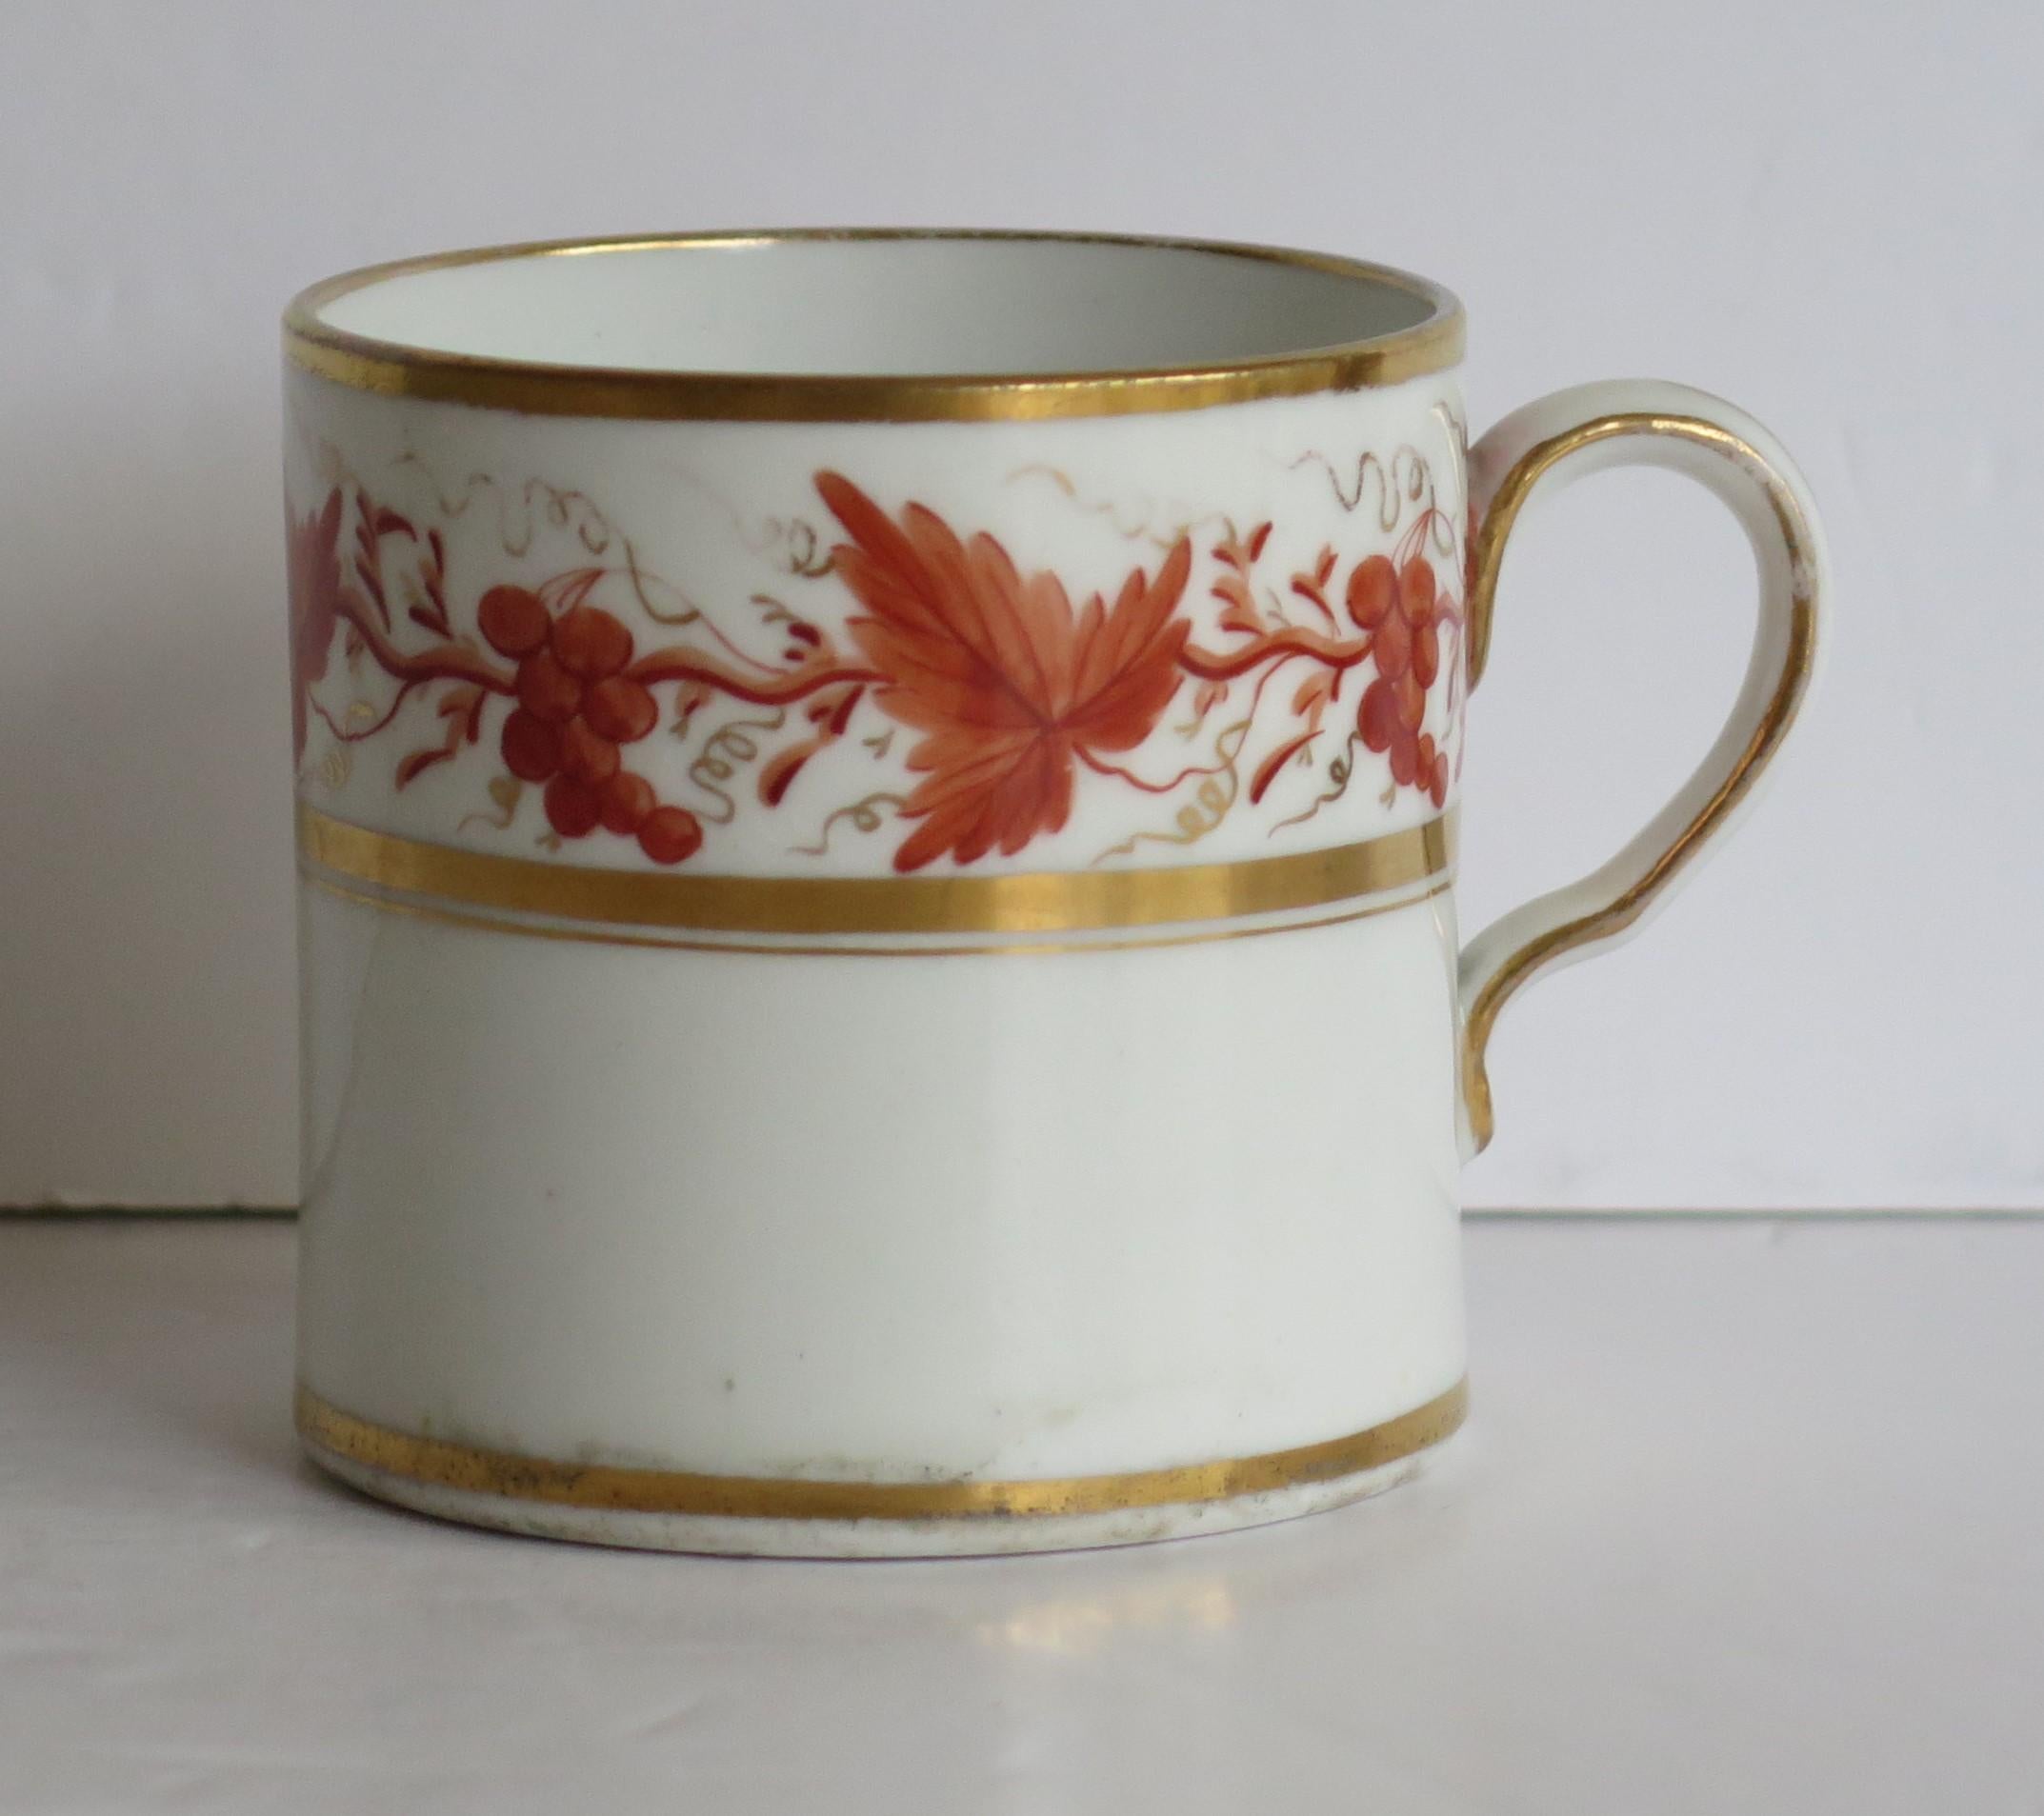 This is a good quality porcelain coffee can that we attribute to either Thomas Wolfe or possibly Spode of Staffordshire, England, made during the very early 19th century, George 111rd period, circa 1805.

The coffee can is nominally parallel, with